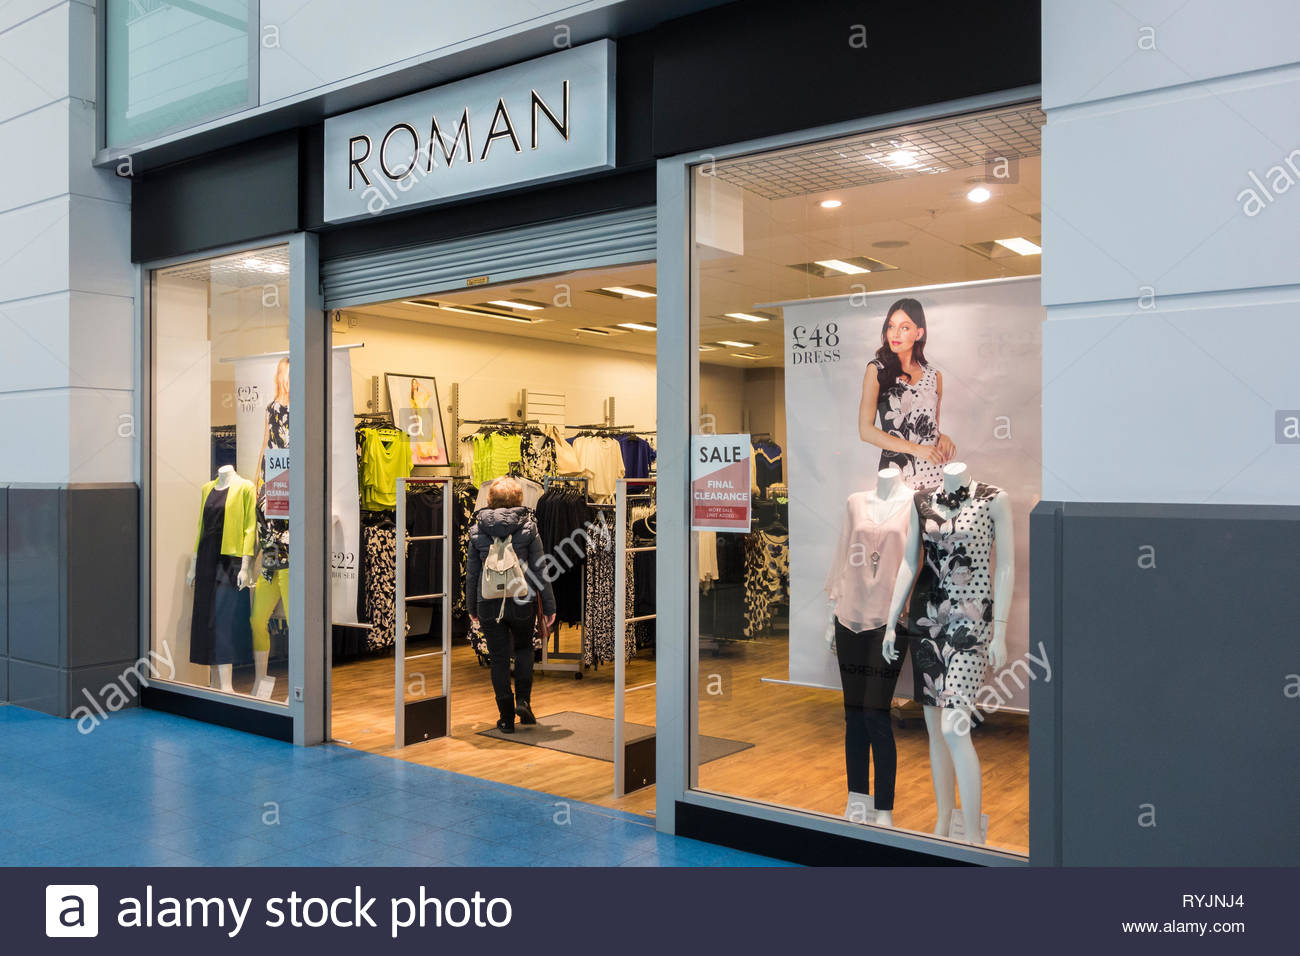 romans clothing clearance